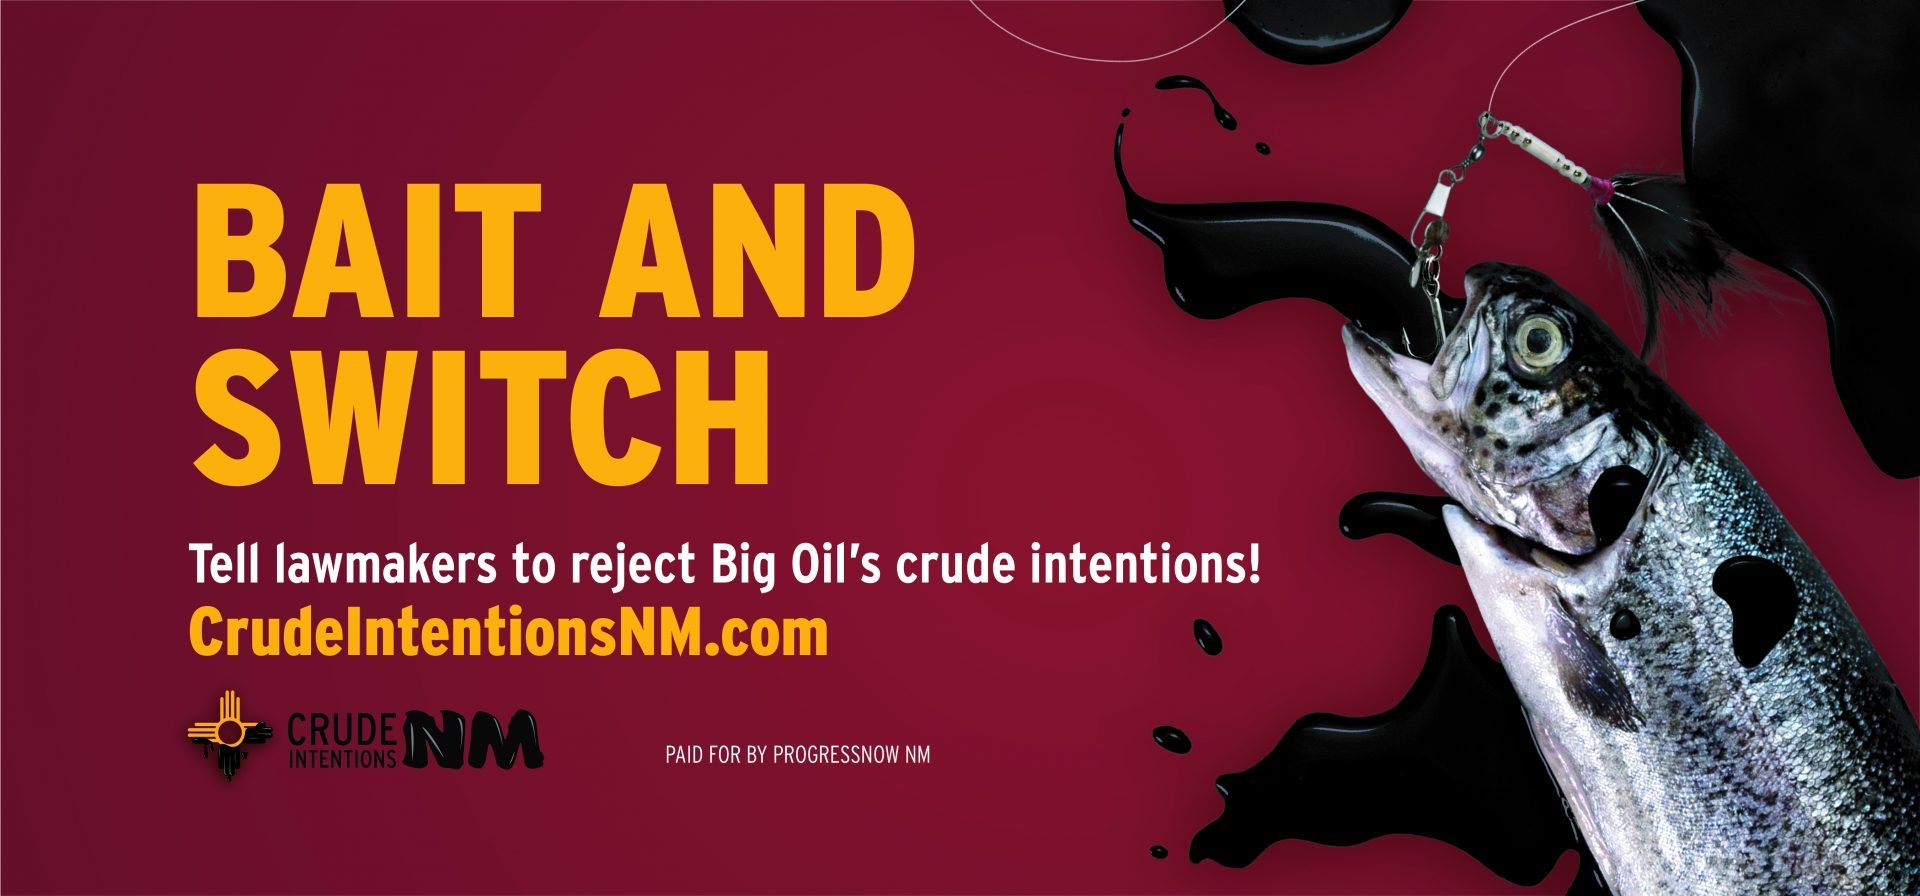 Crude Intentions billboards go up across Permian Basin